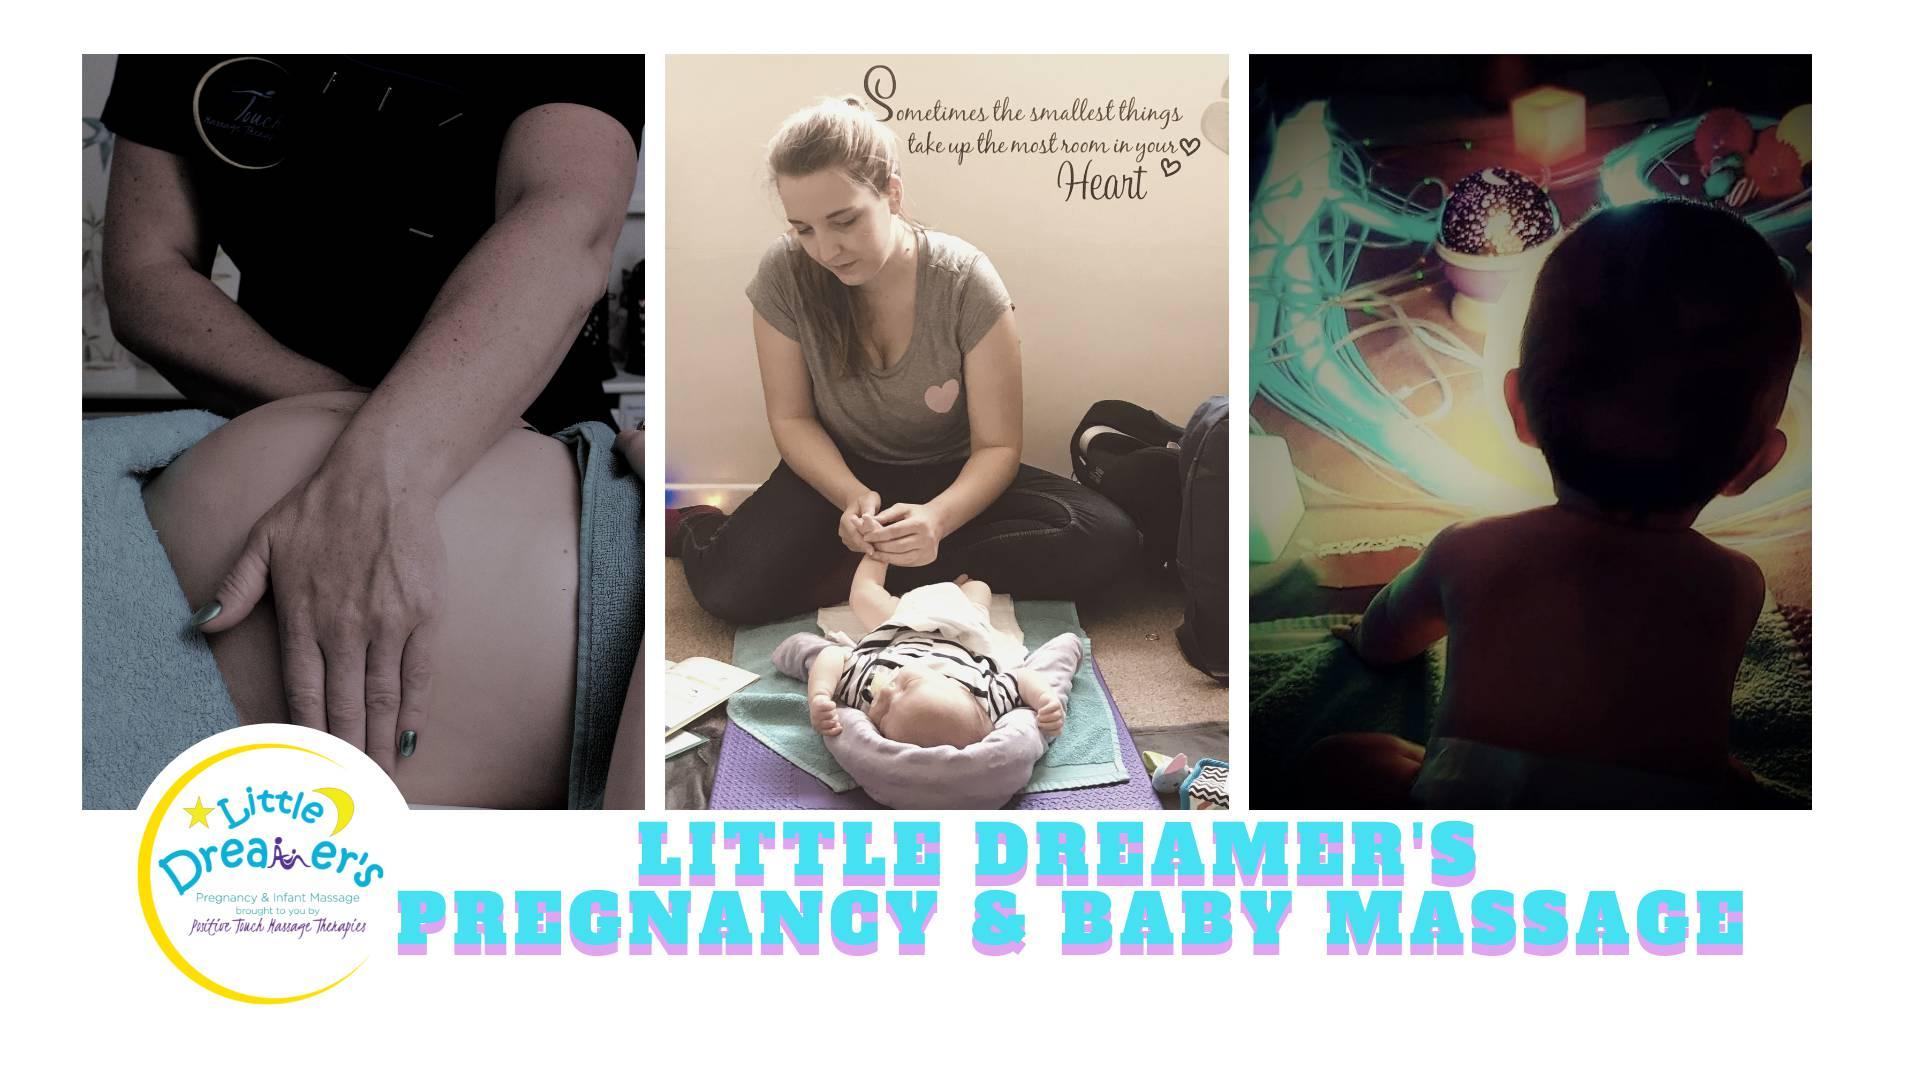 Little Dreamers Pregnancy and Infant Massage photo